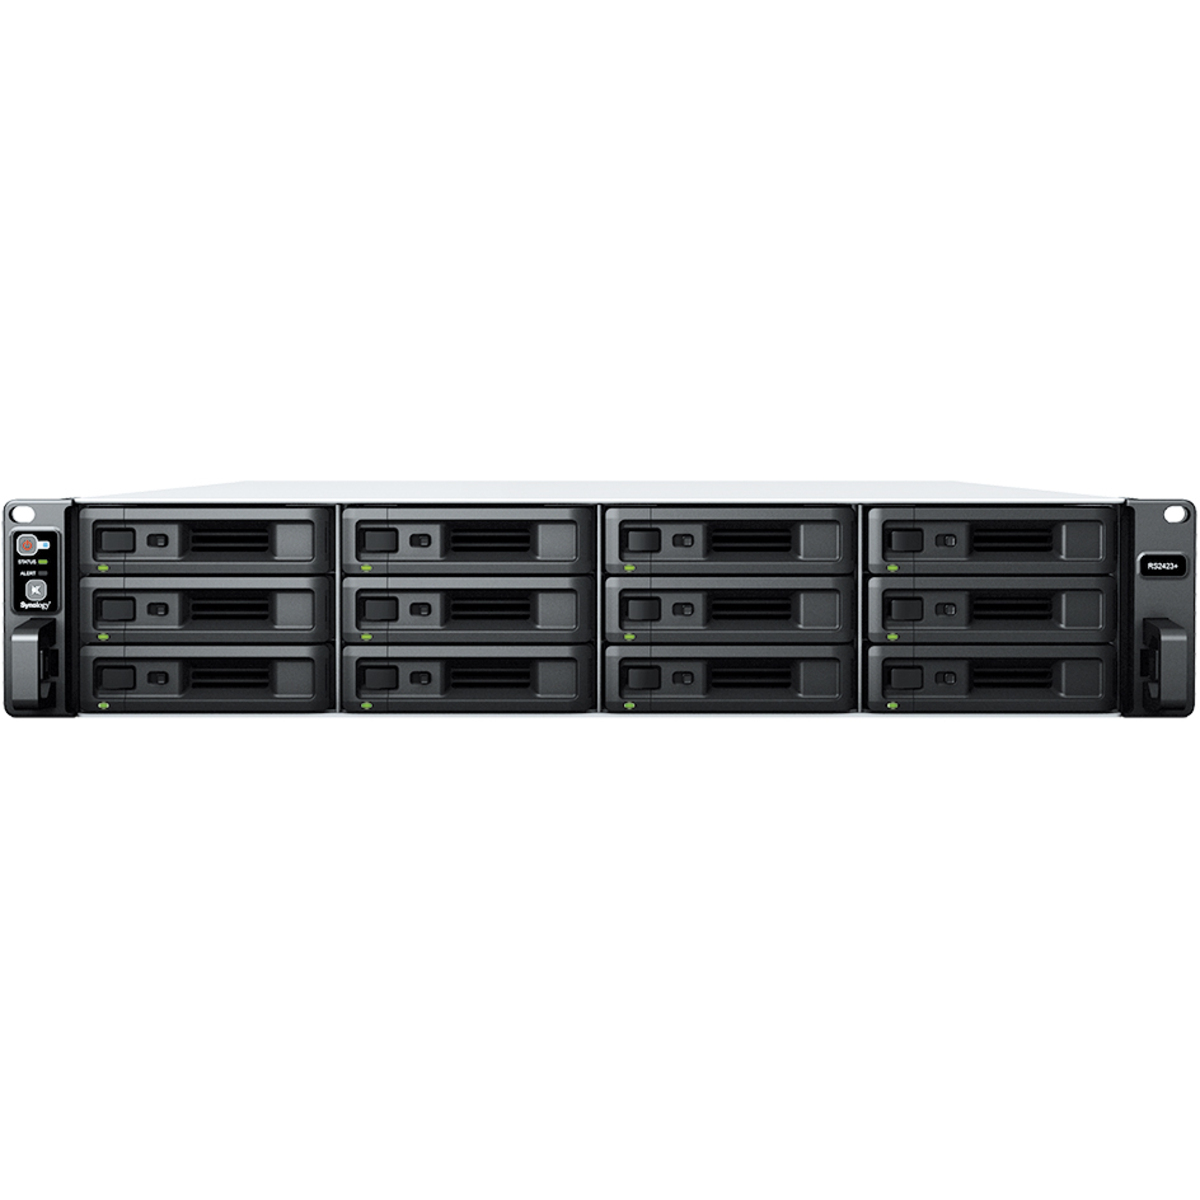 Synology RackStation RS2423+ 192tb 12-Bay RackMount Multimedia / Power User / Business NAS - Network Attached Storage Device 8x24tb Western Digital Ultrastar HC580 SED WUH722424ALE6L1 3.5 7200rpm SATA 6Gb/s HDD ENTERPRISE Class Drives Installed - Burn-In Tested RackStation RS2423+